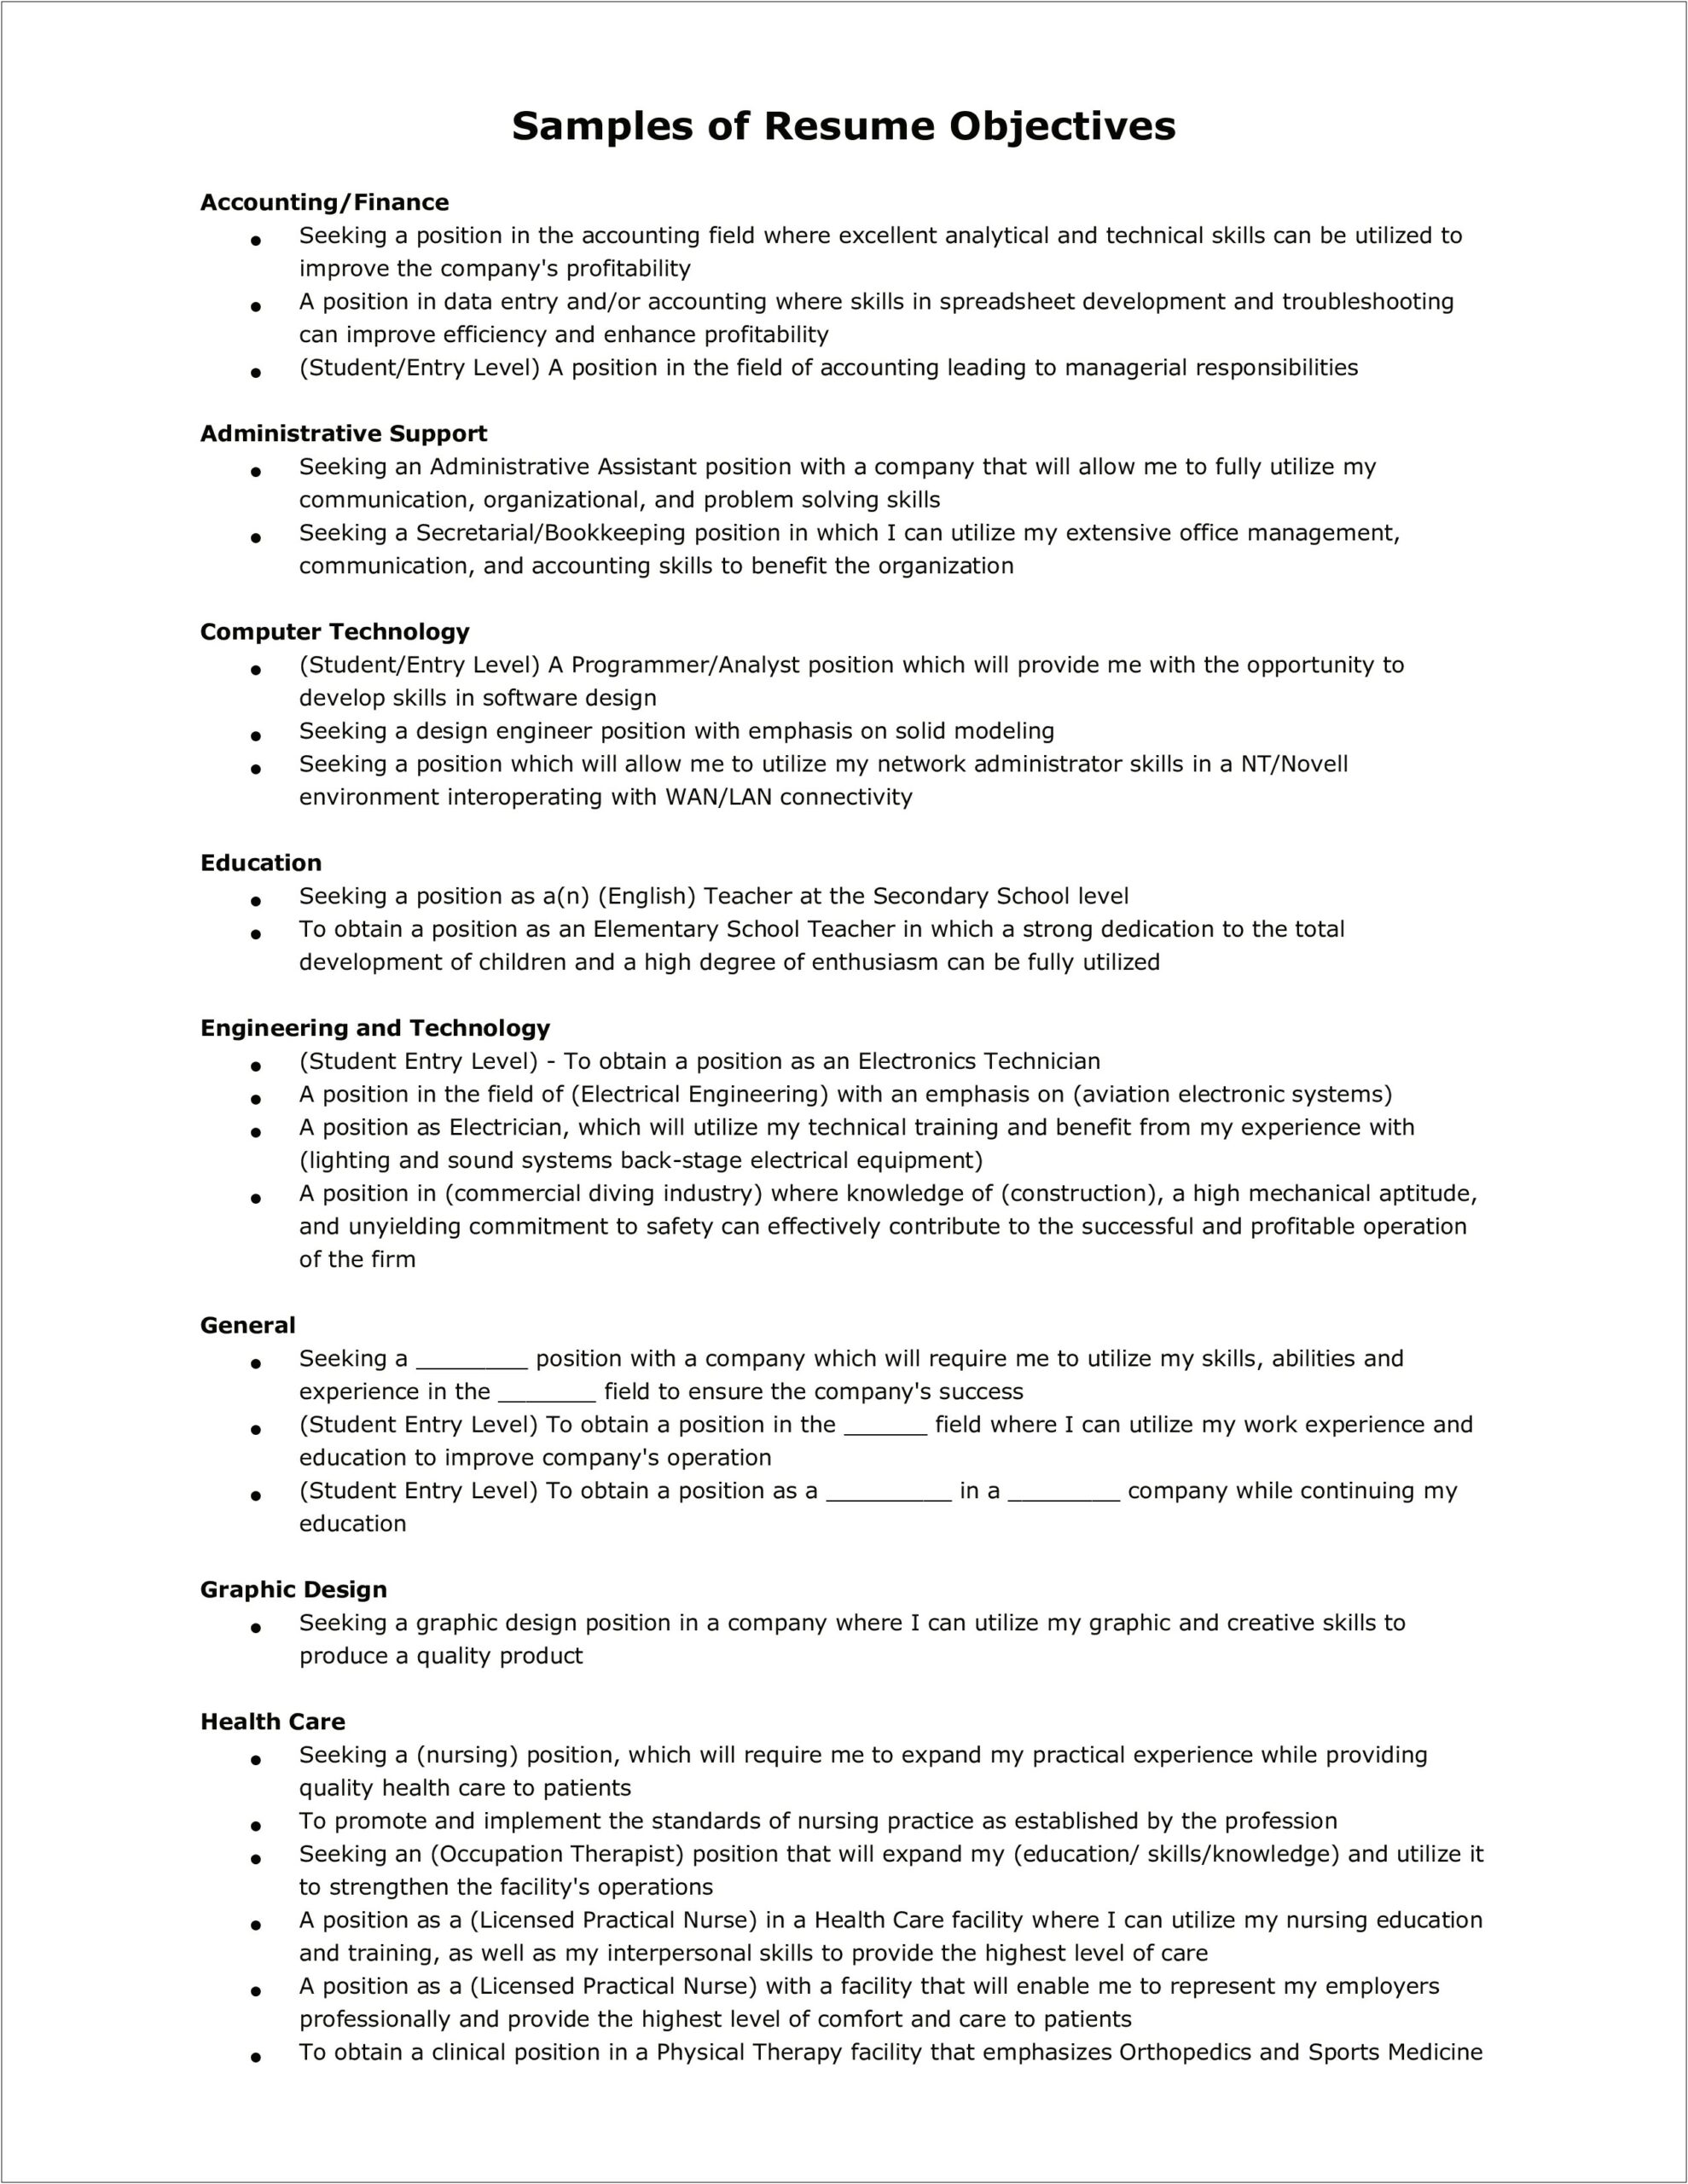 Resume Objective For Office Work